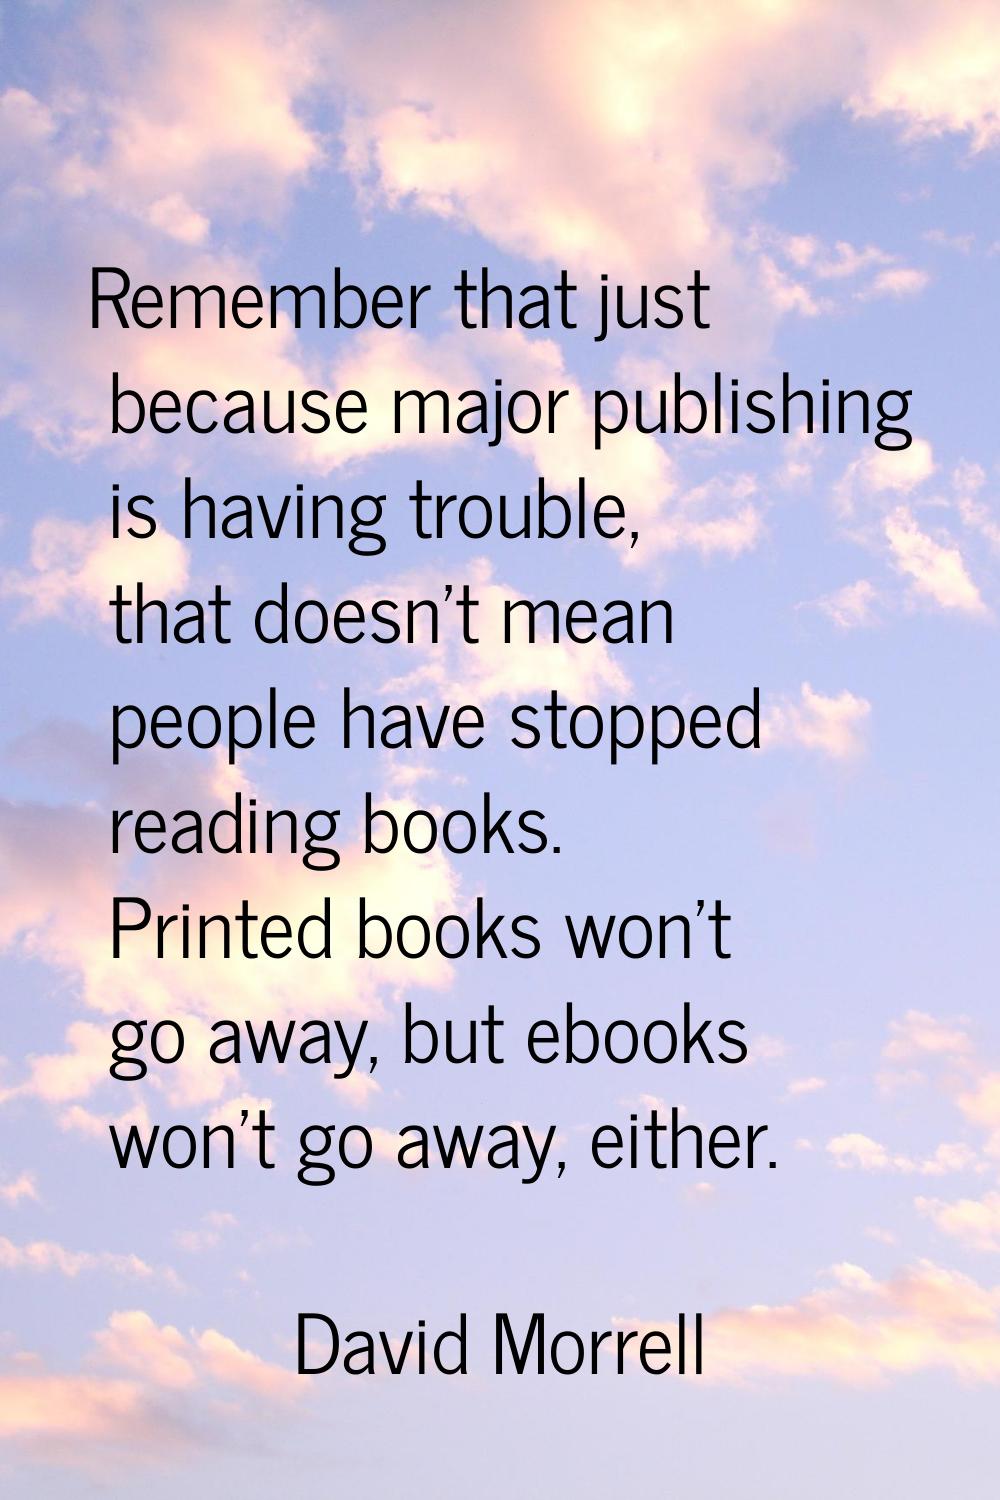 Remember that just because major publishing is having trouble, that doesn't mean people have stoppe